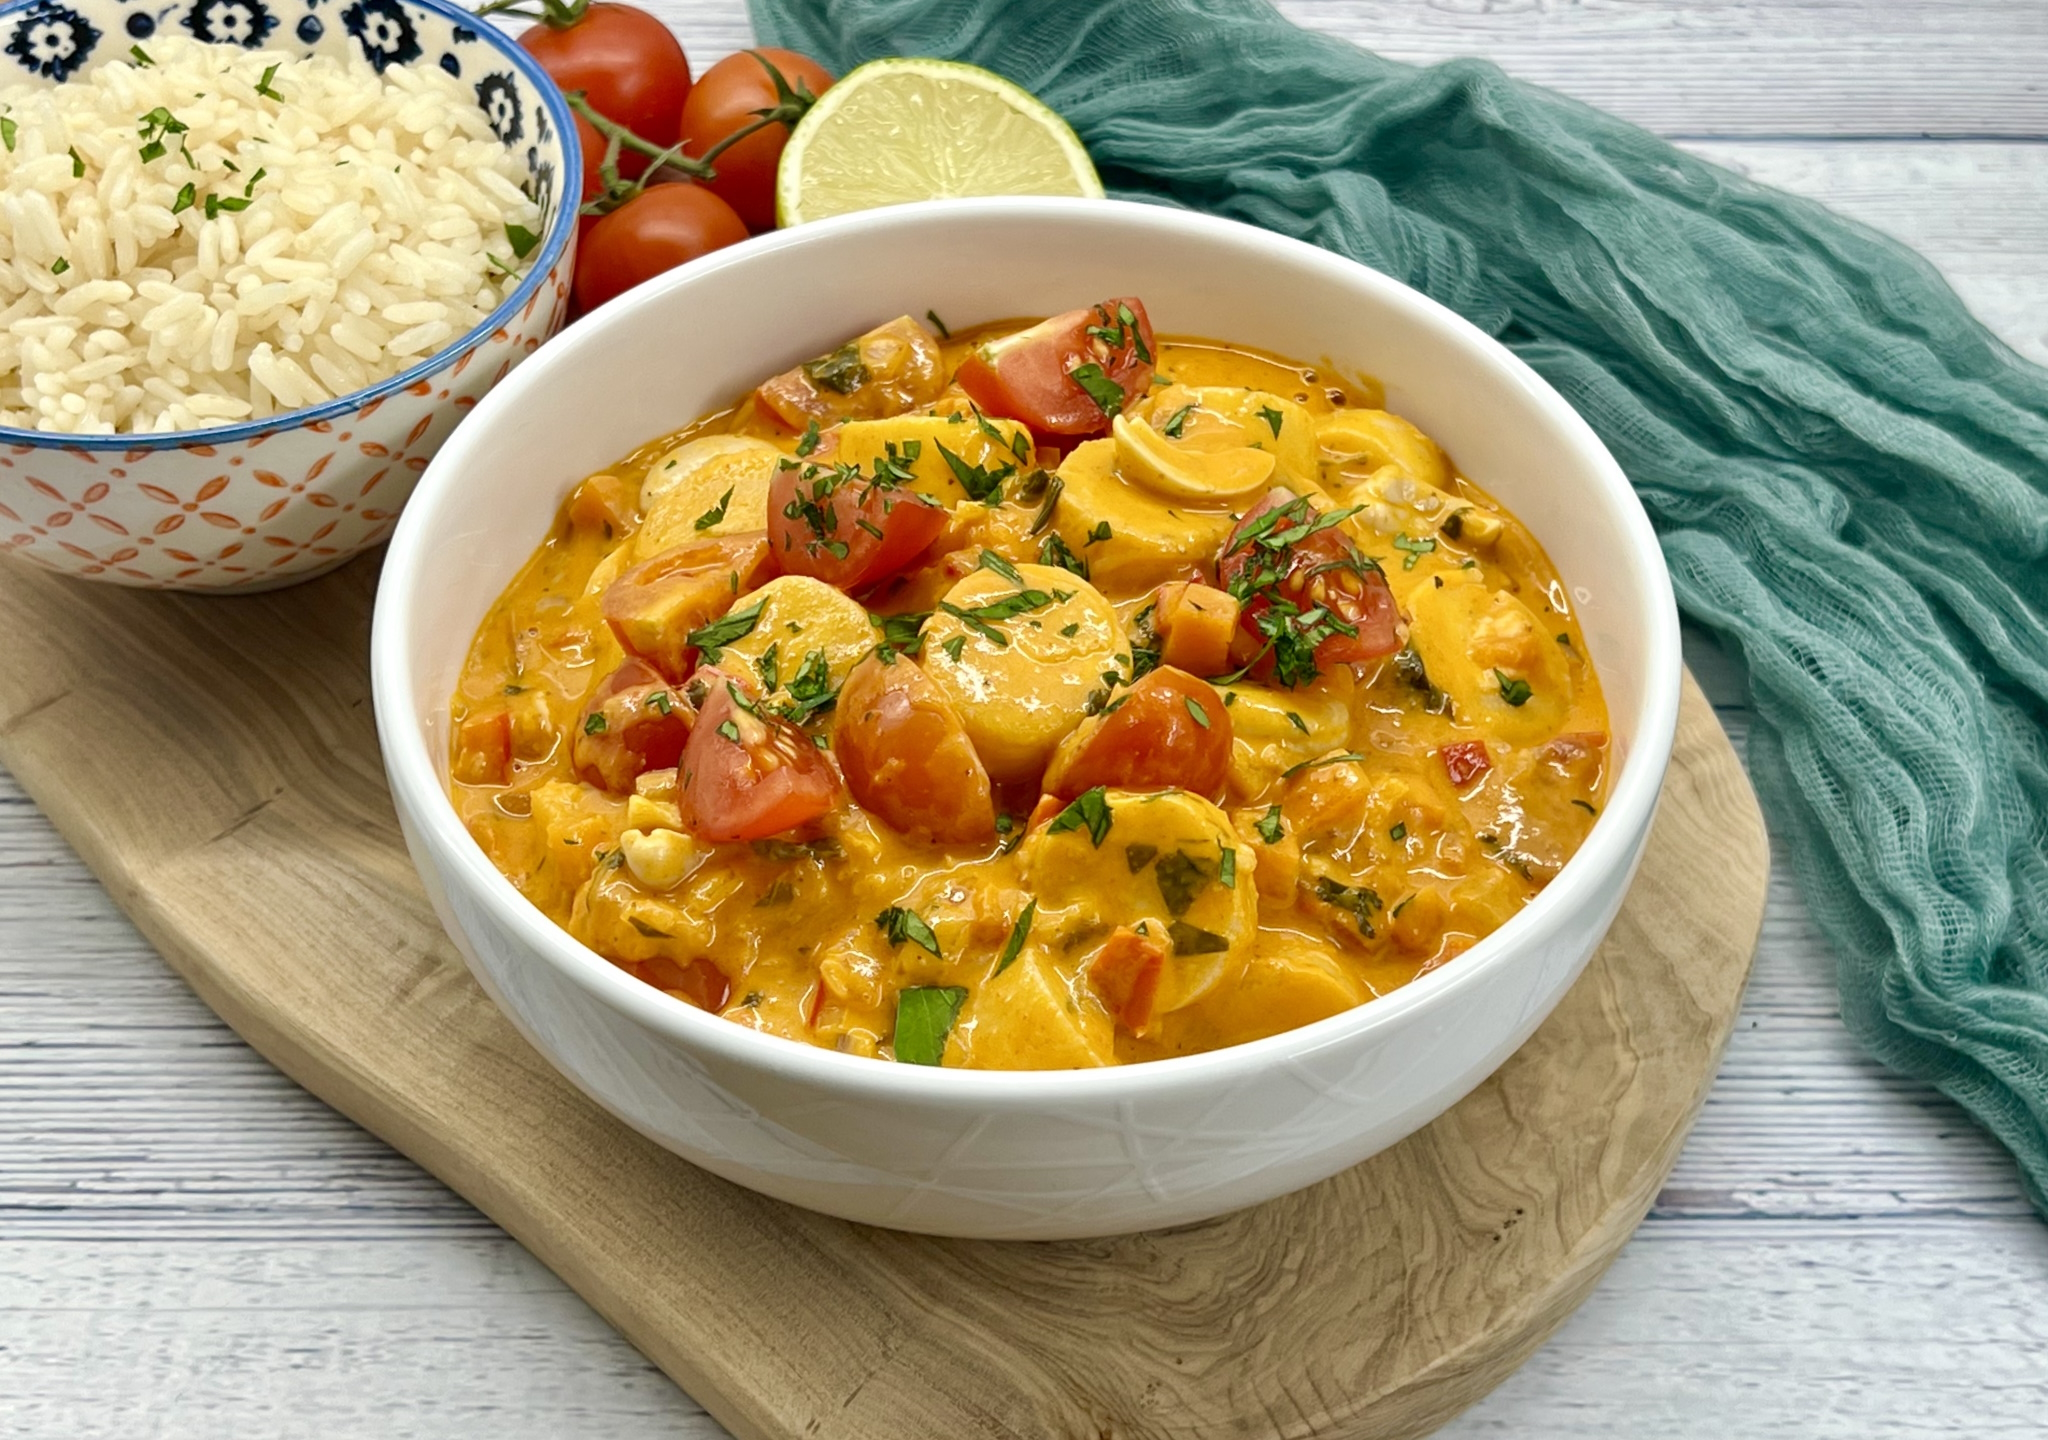 Vegan Moqueca, hearts of palm and vegetables in a spicy and aromatic tomato and coconut sauce.